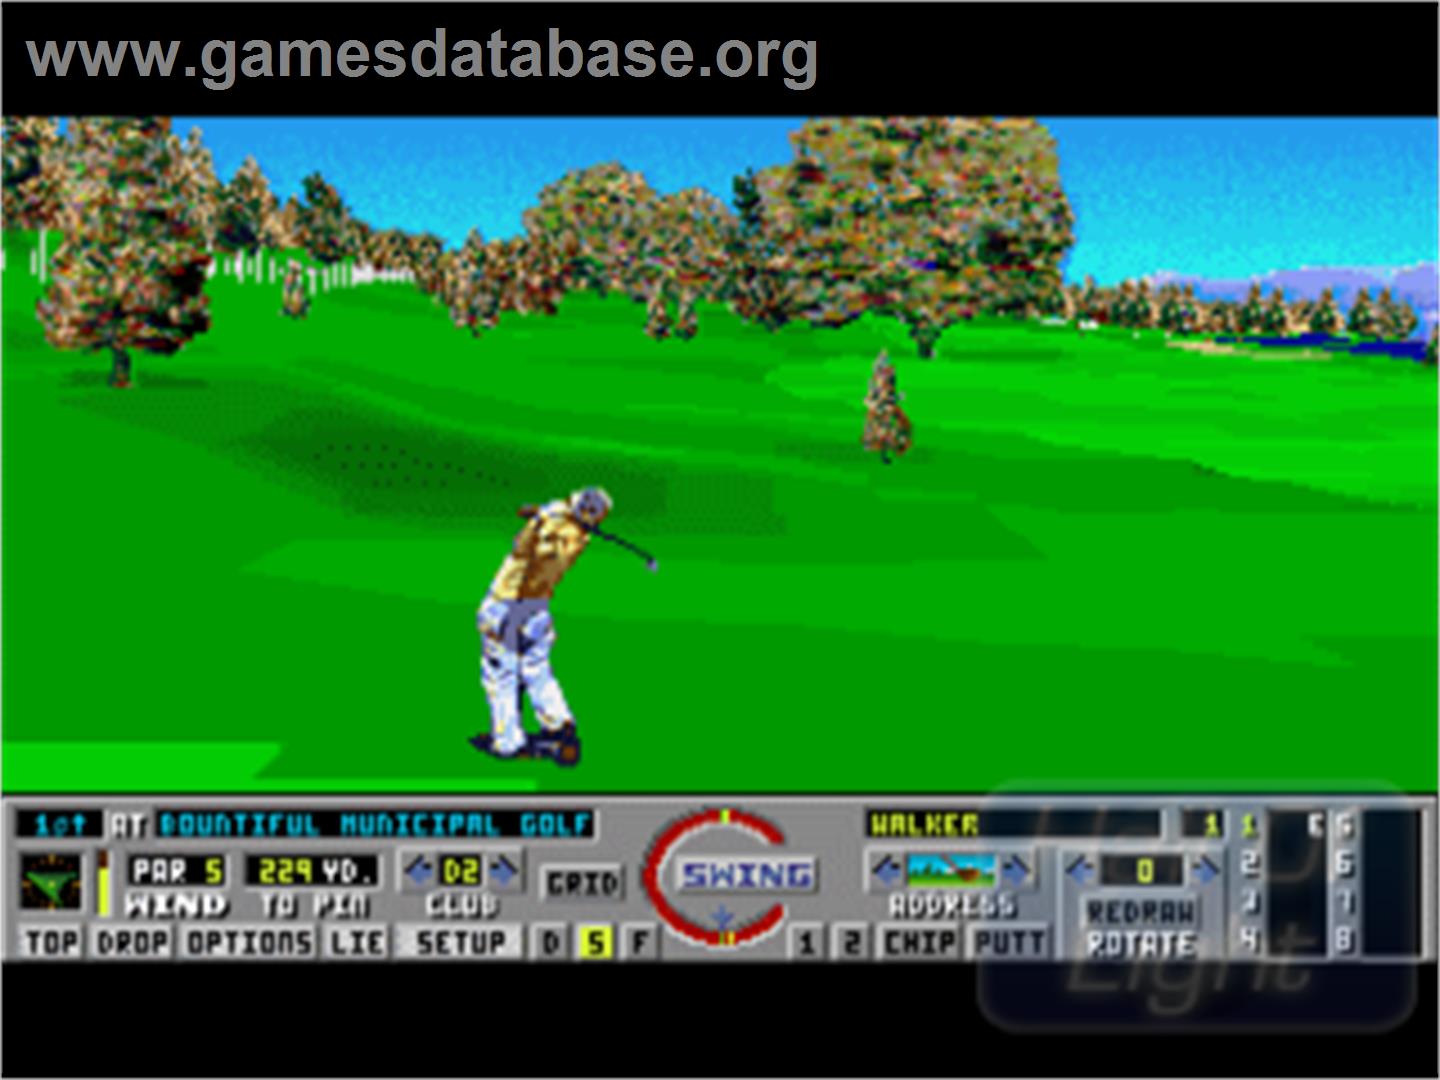 Links: The Challenge of Golf - Commodore Amiga - Artwork - In Game